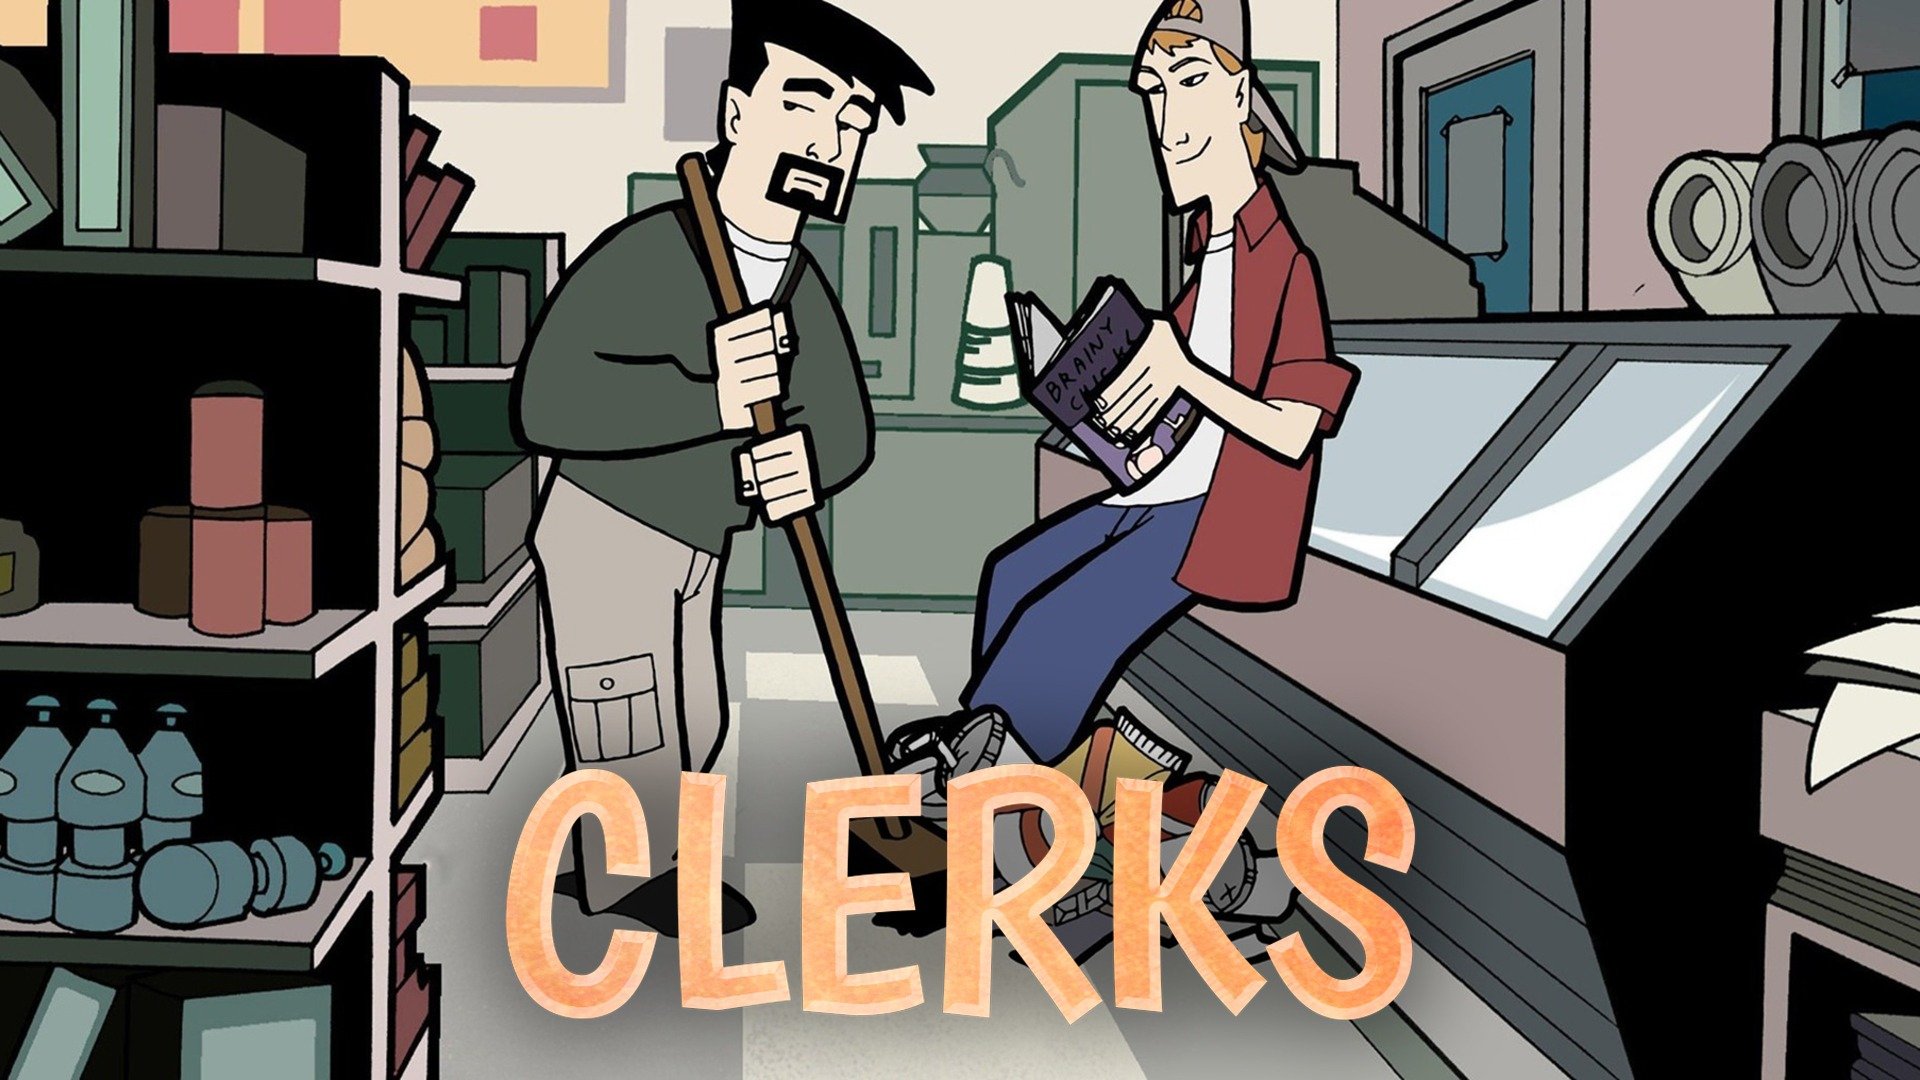 The Clerks 3 Documentary Movie Streaming Online Watch on Lionsgate Play